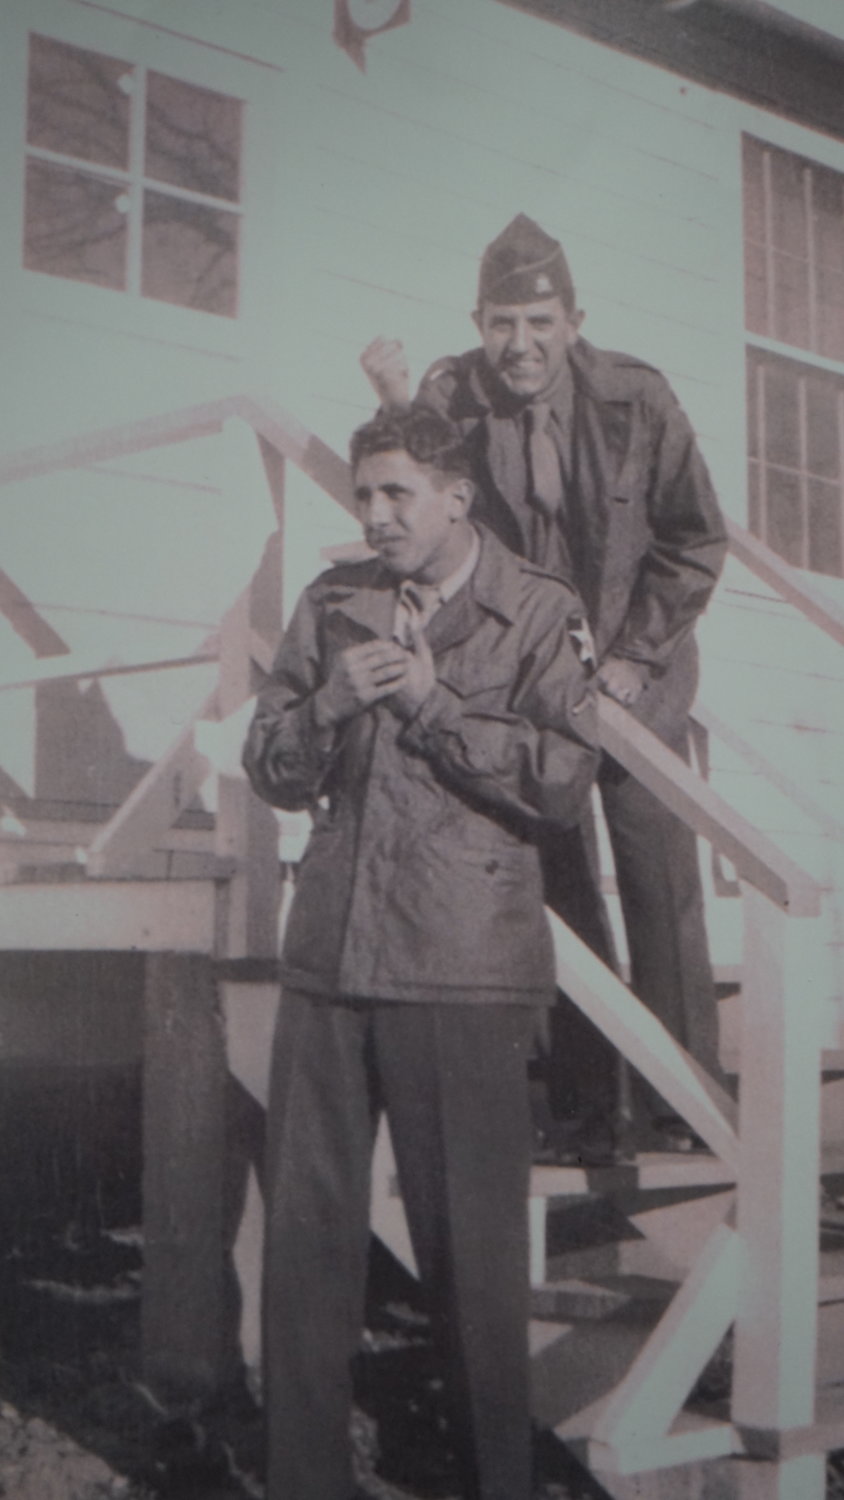 Valley Streamer Louis Palermo, left, in 1945. He was one of two from Valley Stream known to have directly taken part in the D-Day invasion.